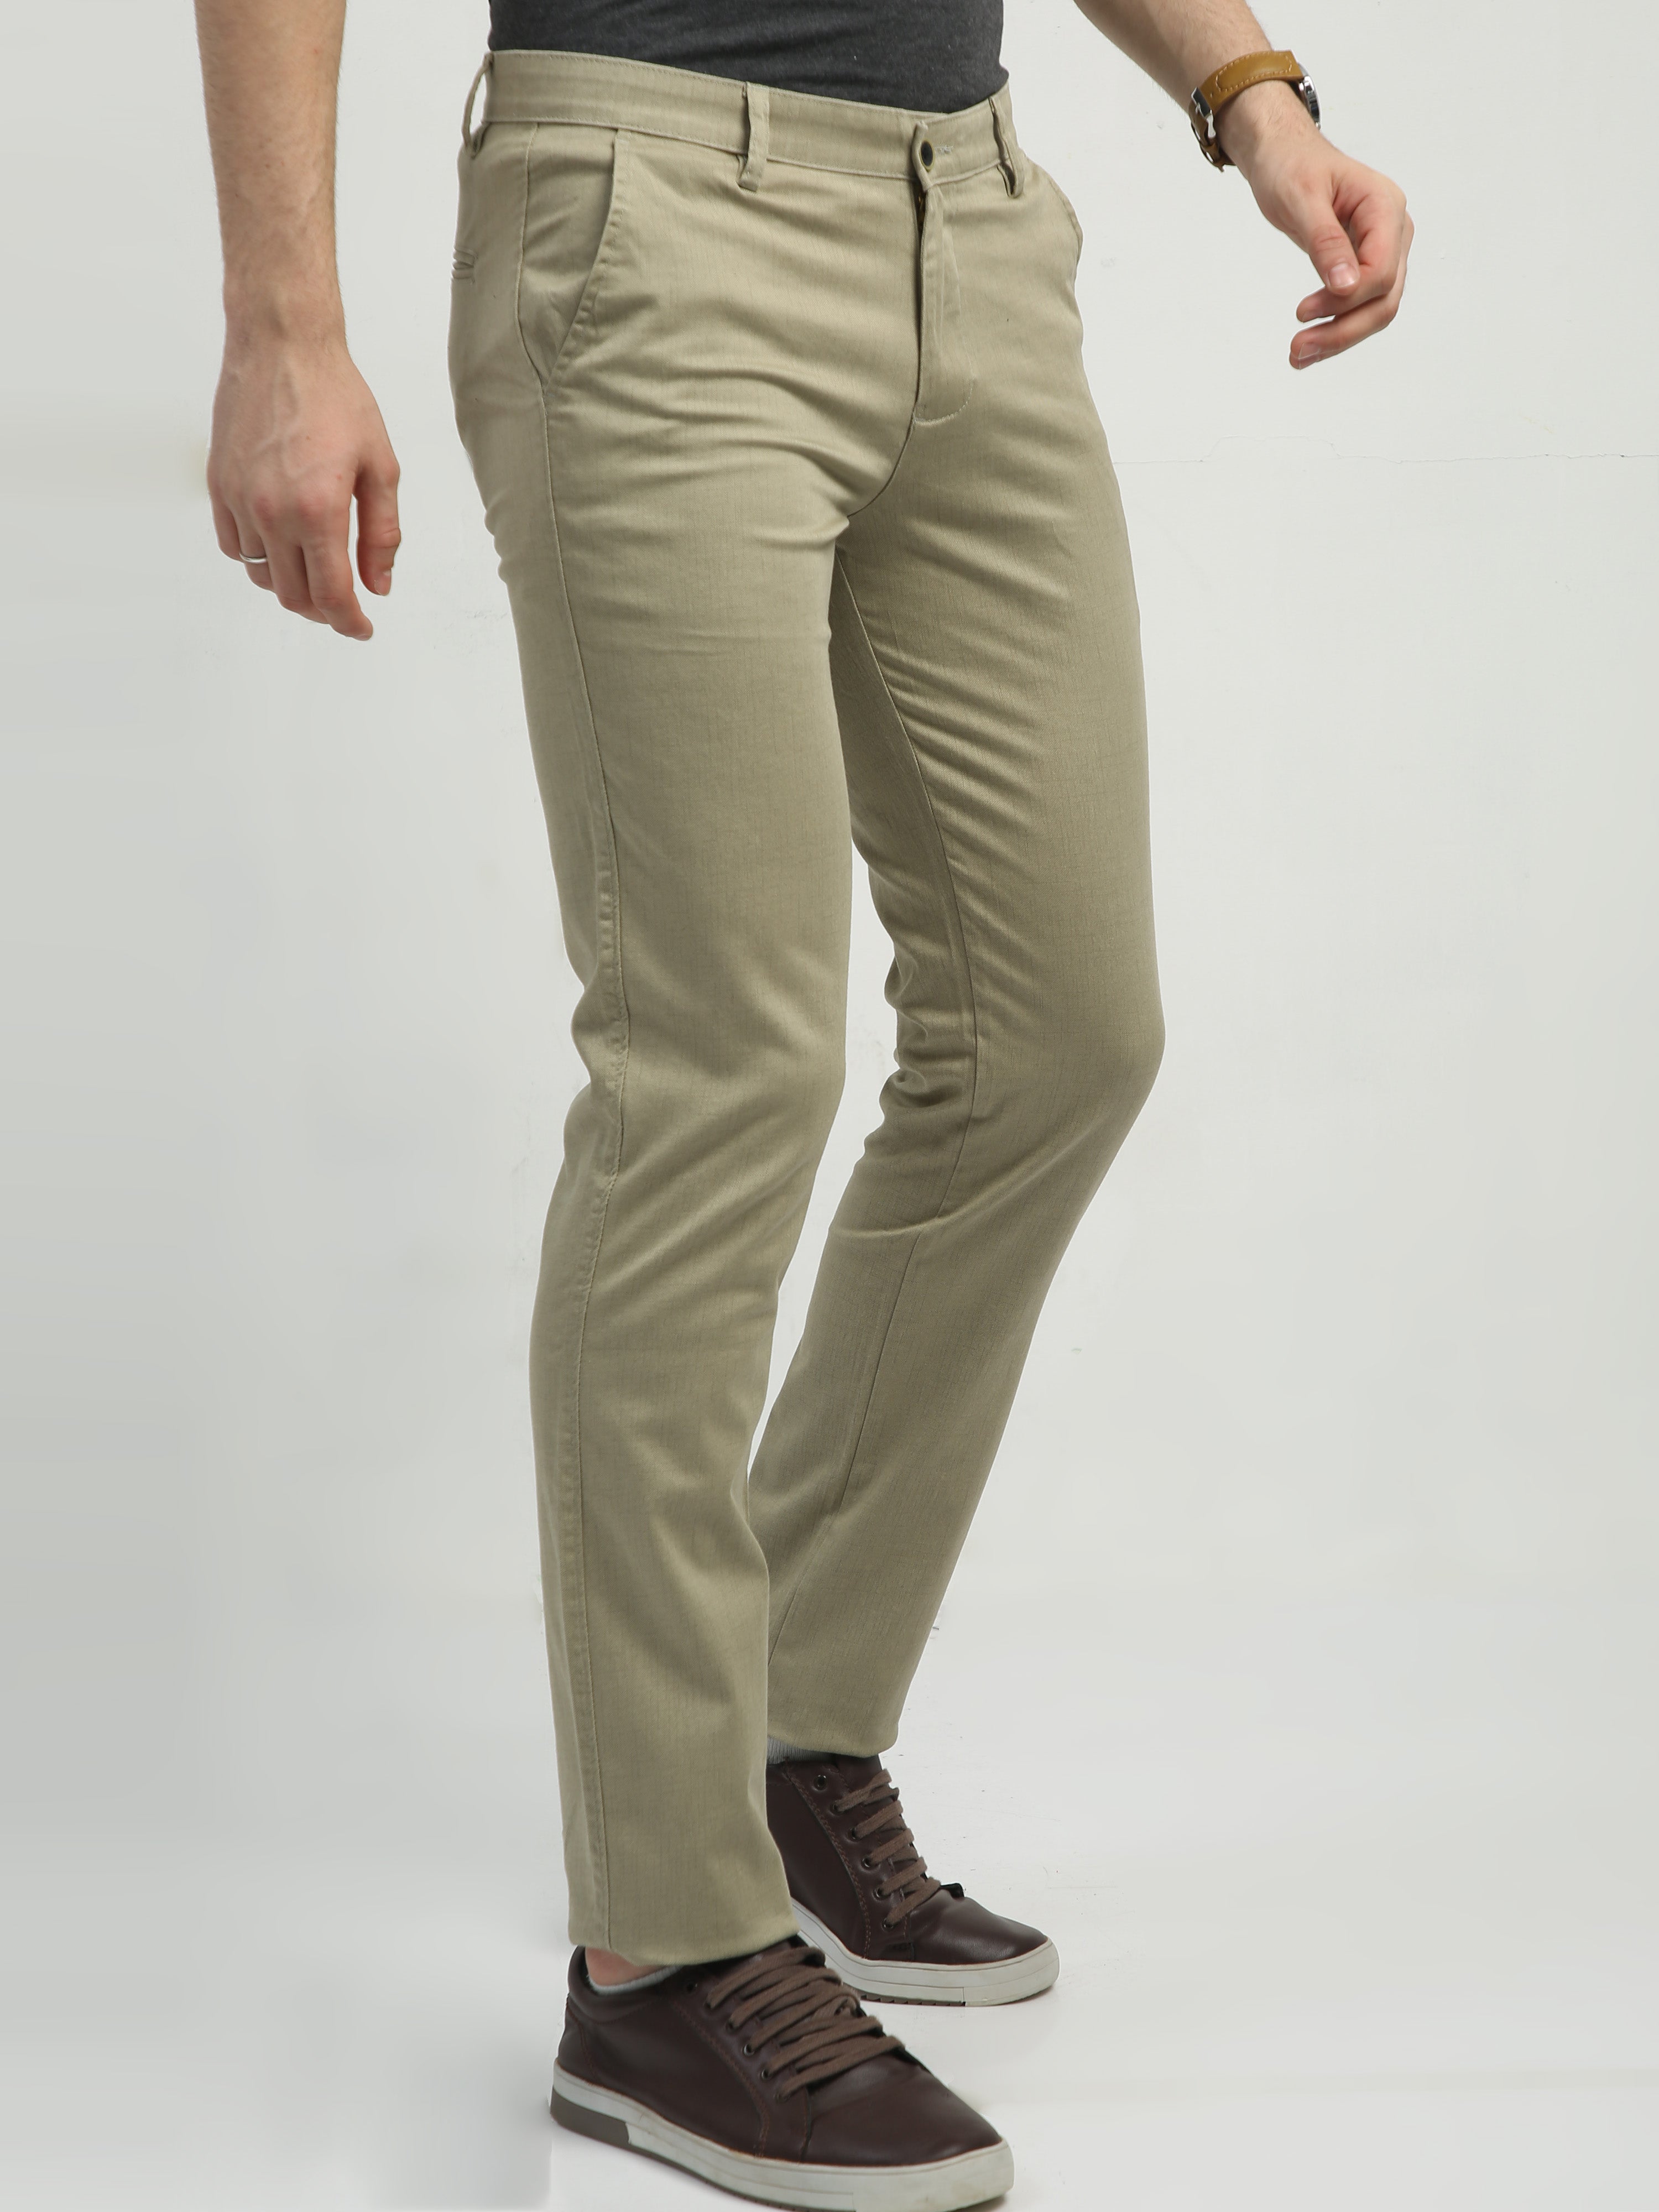 Brick Brown Cotton Men's Formal Trousers in Regular Fit – outtlet.com